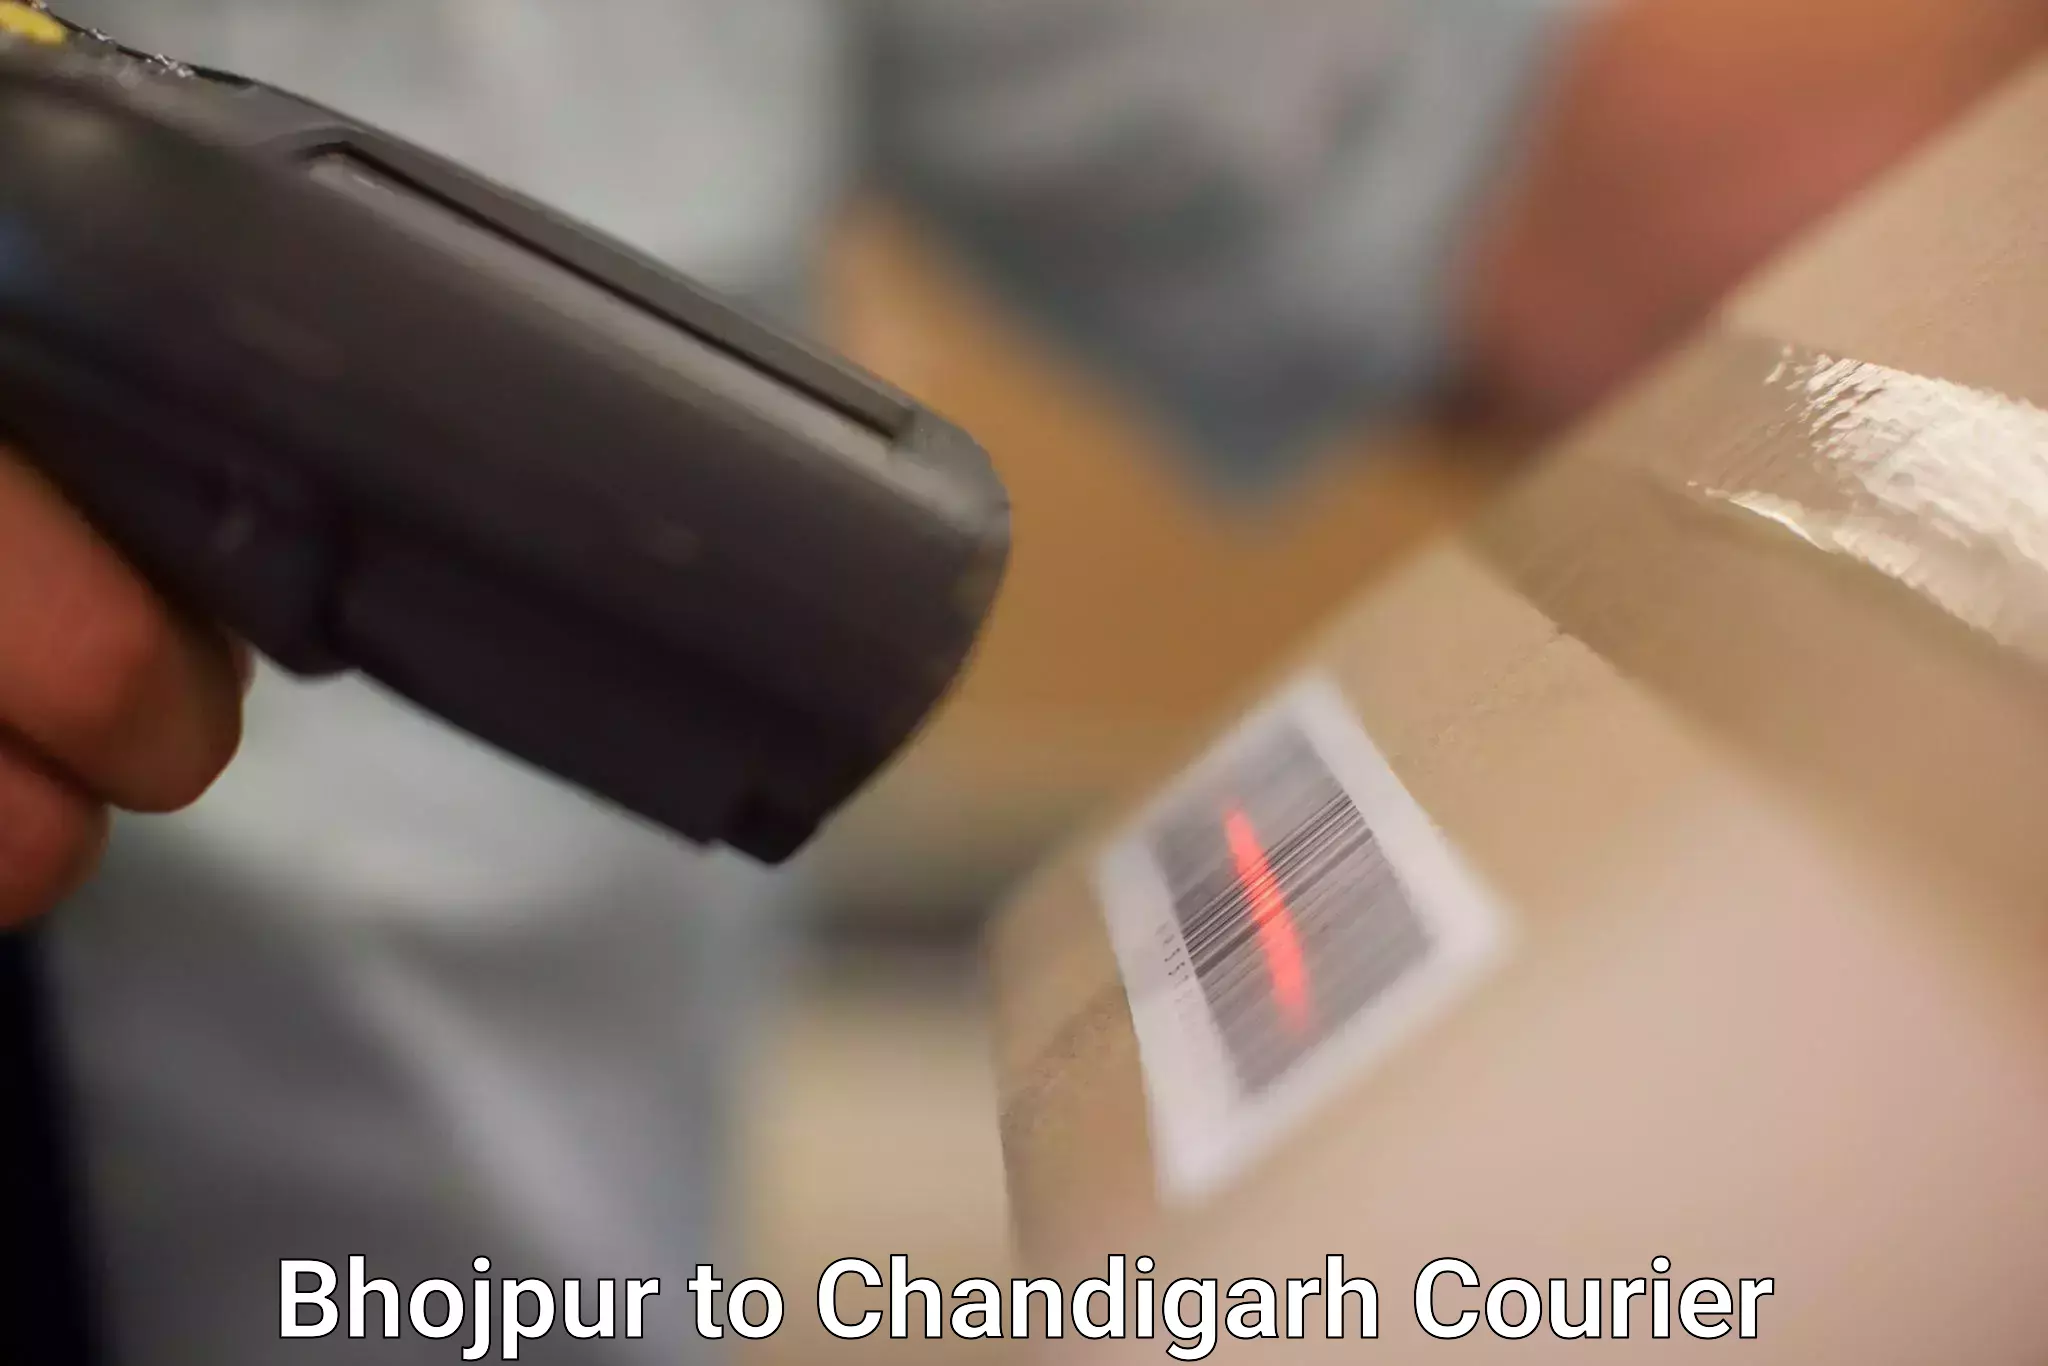 High-priority parcel service Bhojpur to Panjab University Chandigarh